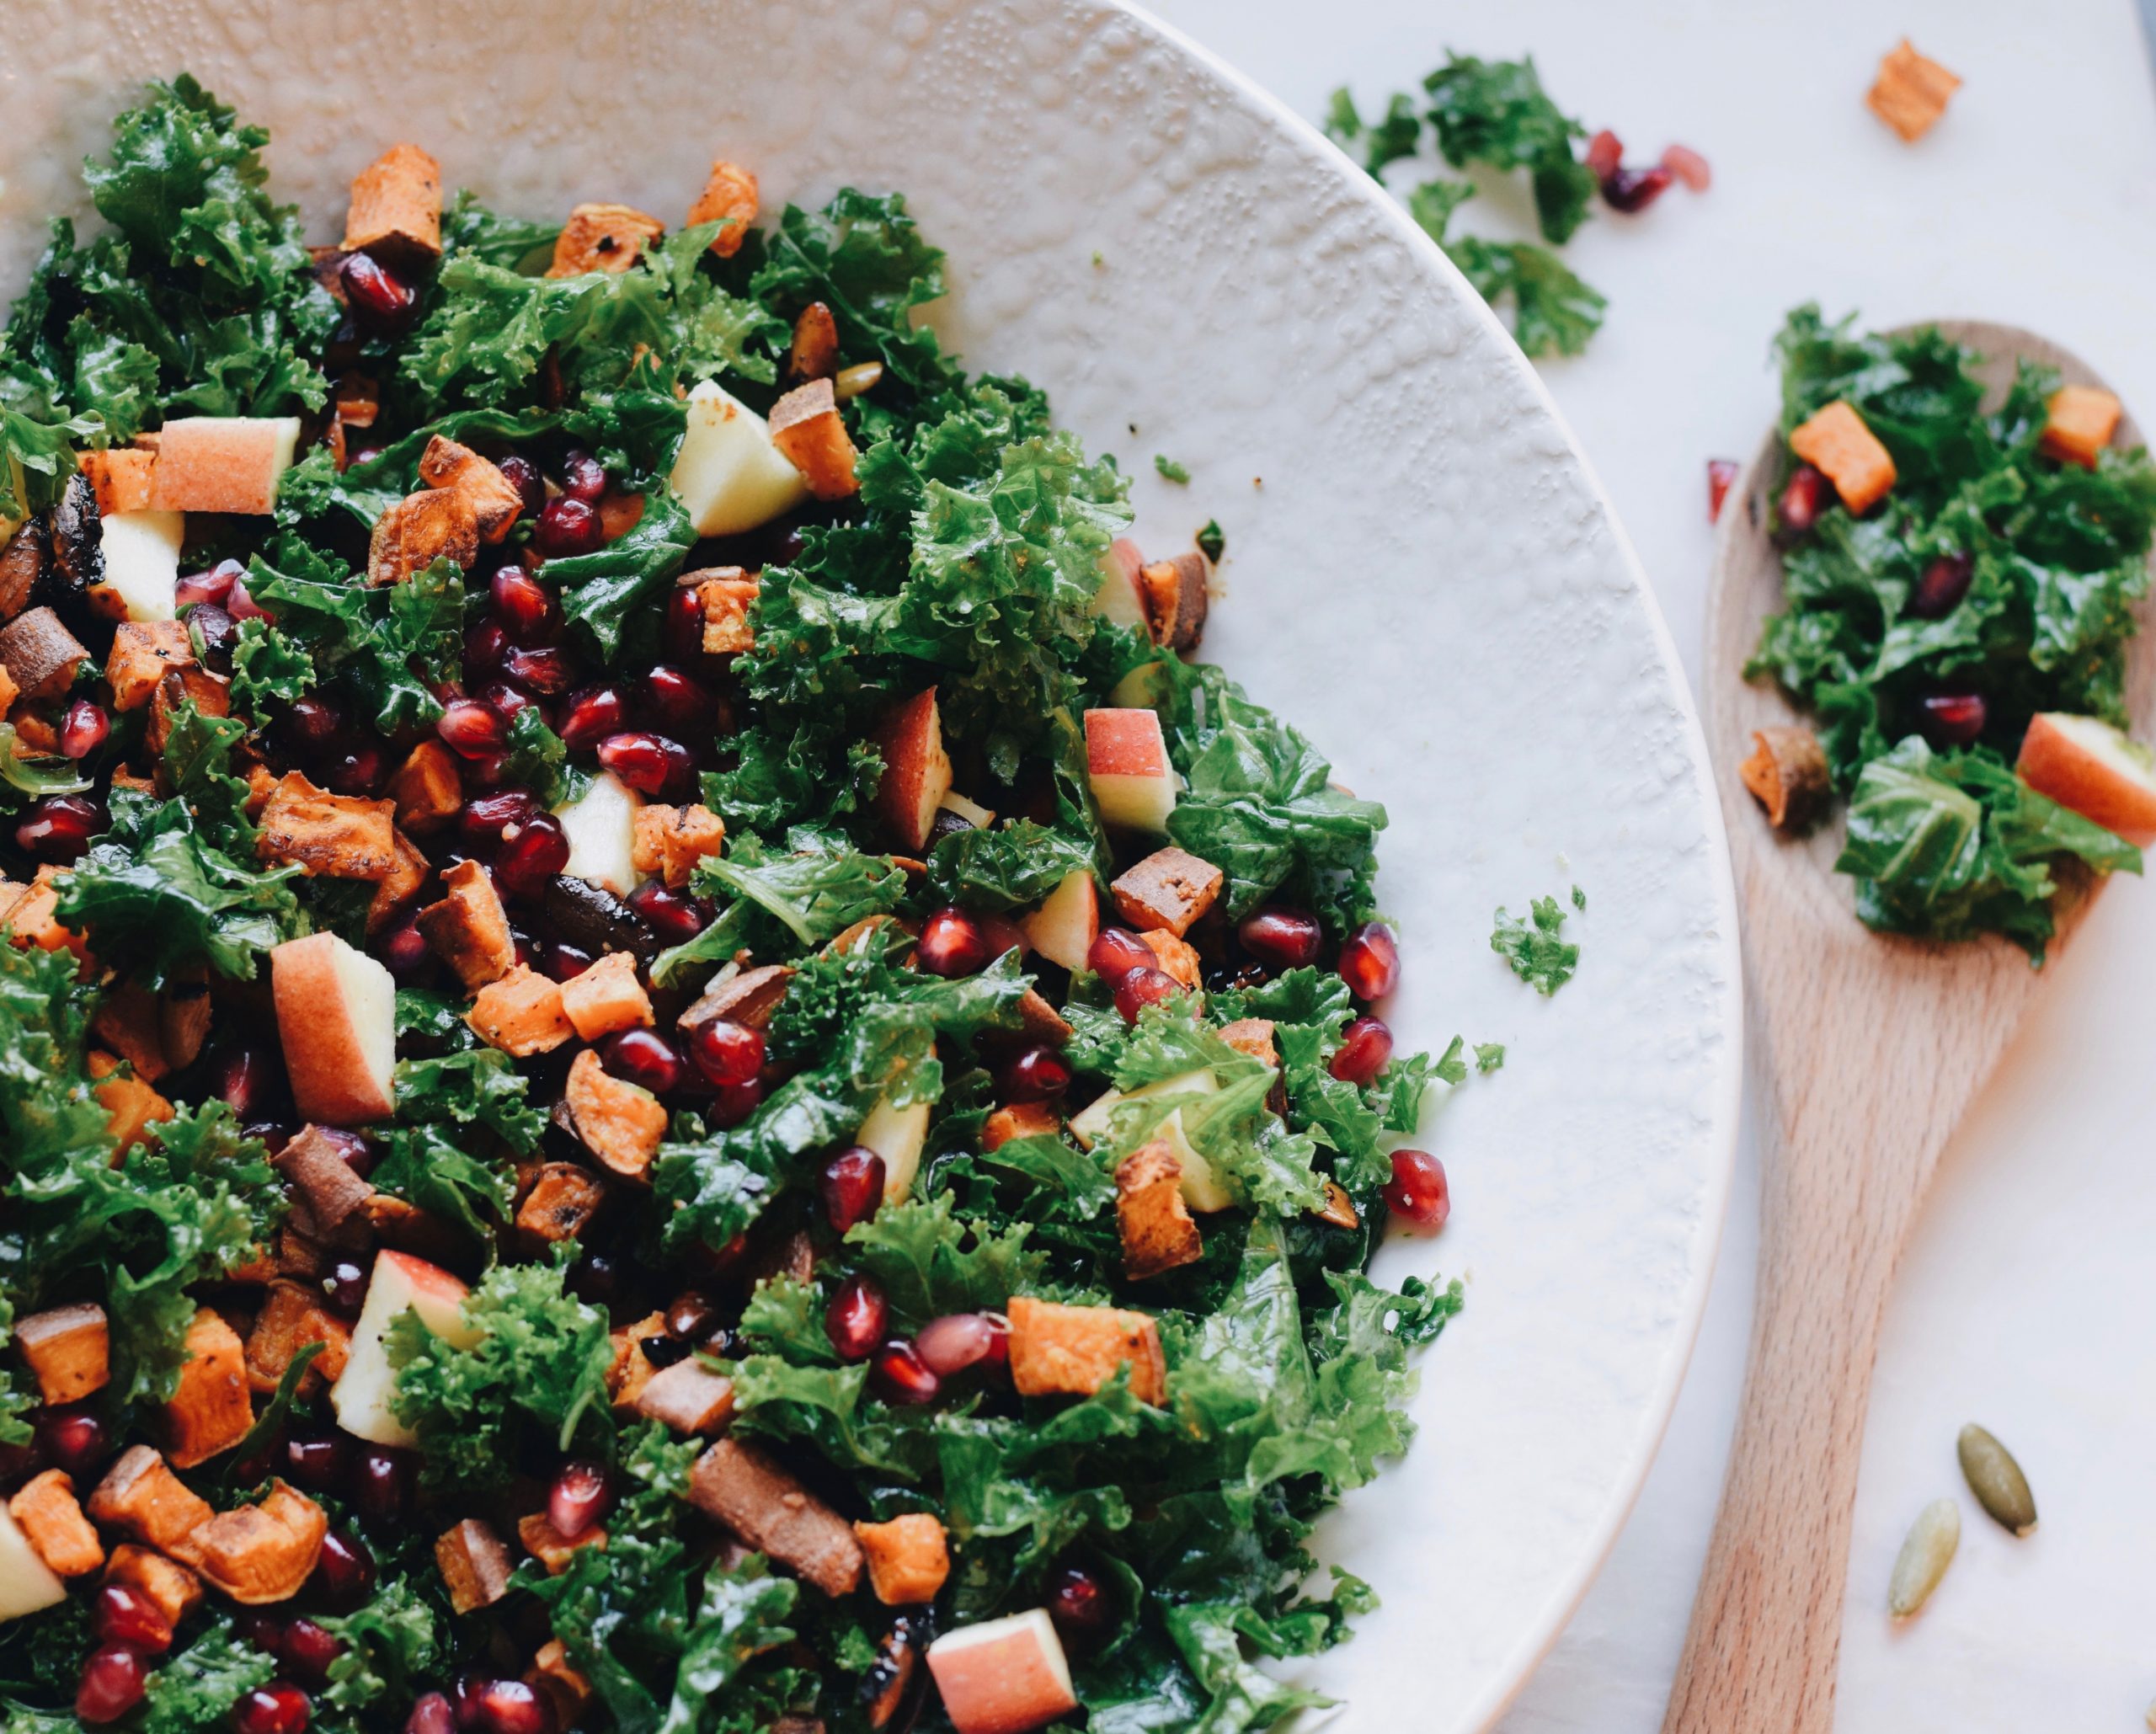 kale salad with apples, sweet potatoes, pumpkin seeds and pomegranate seeds in a white serving dish